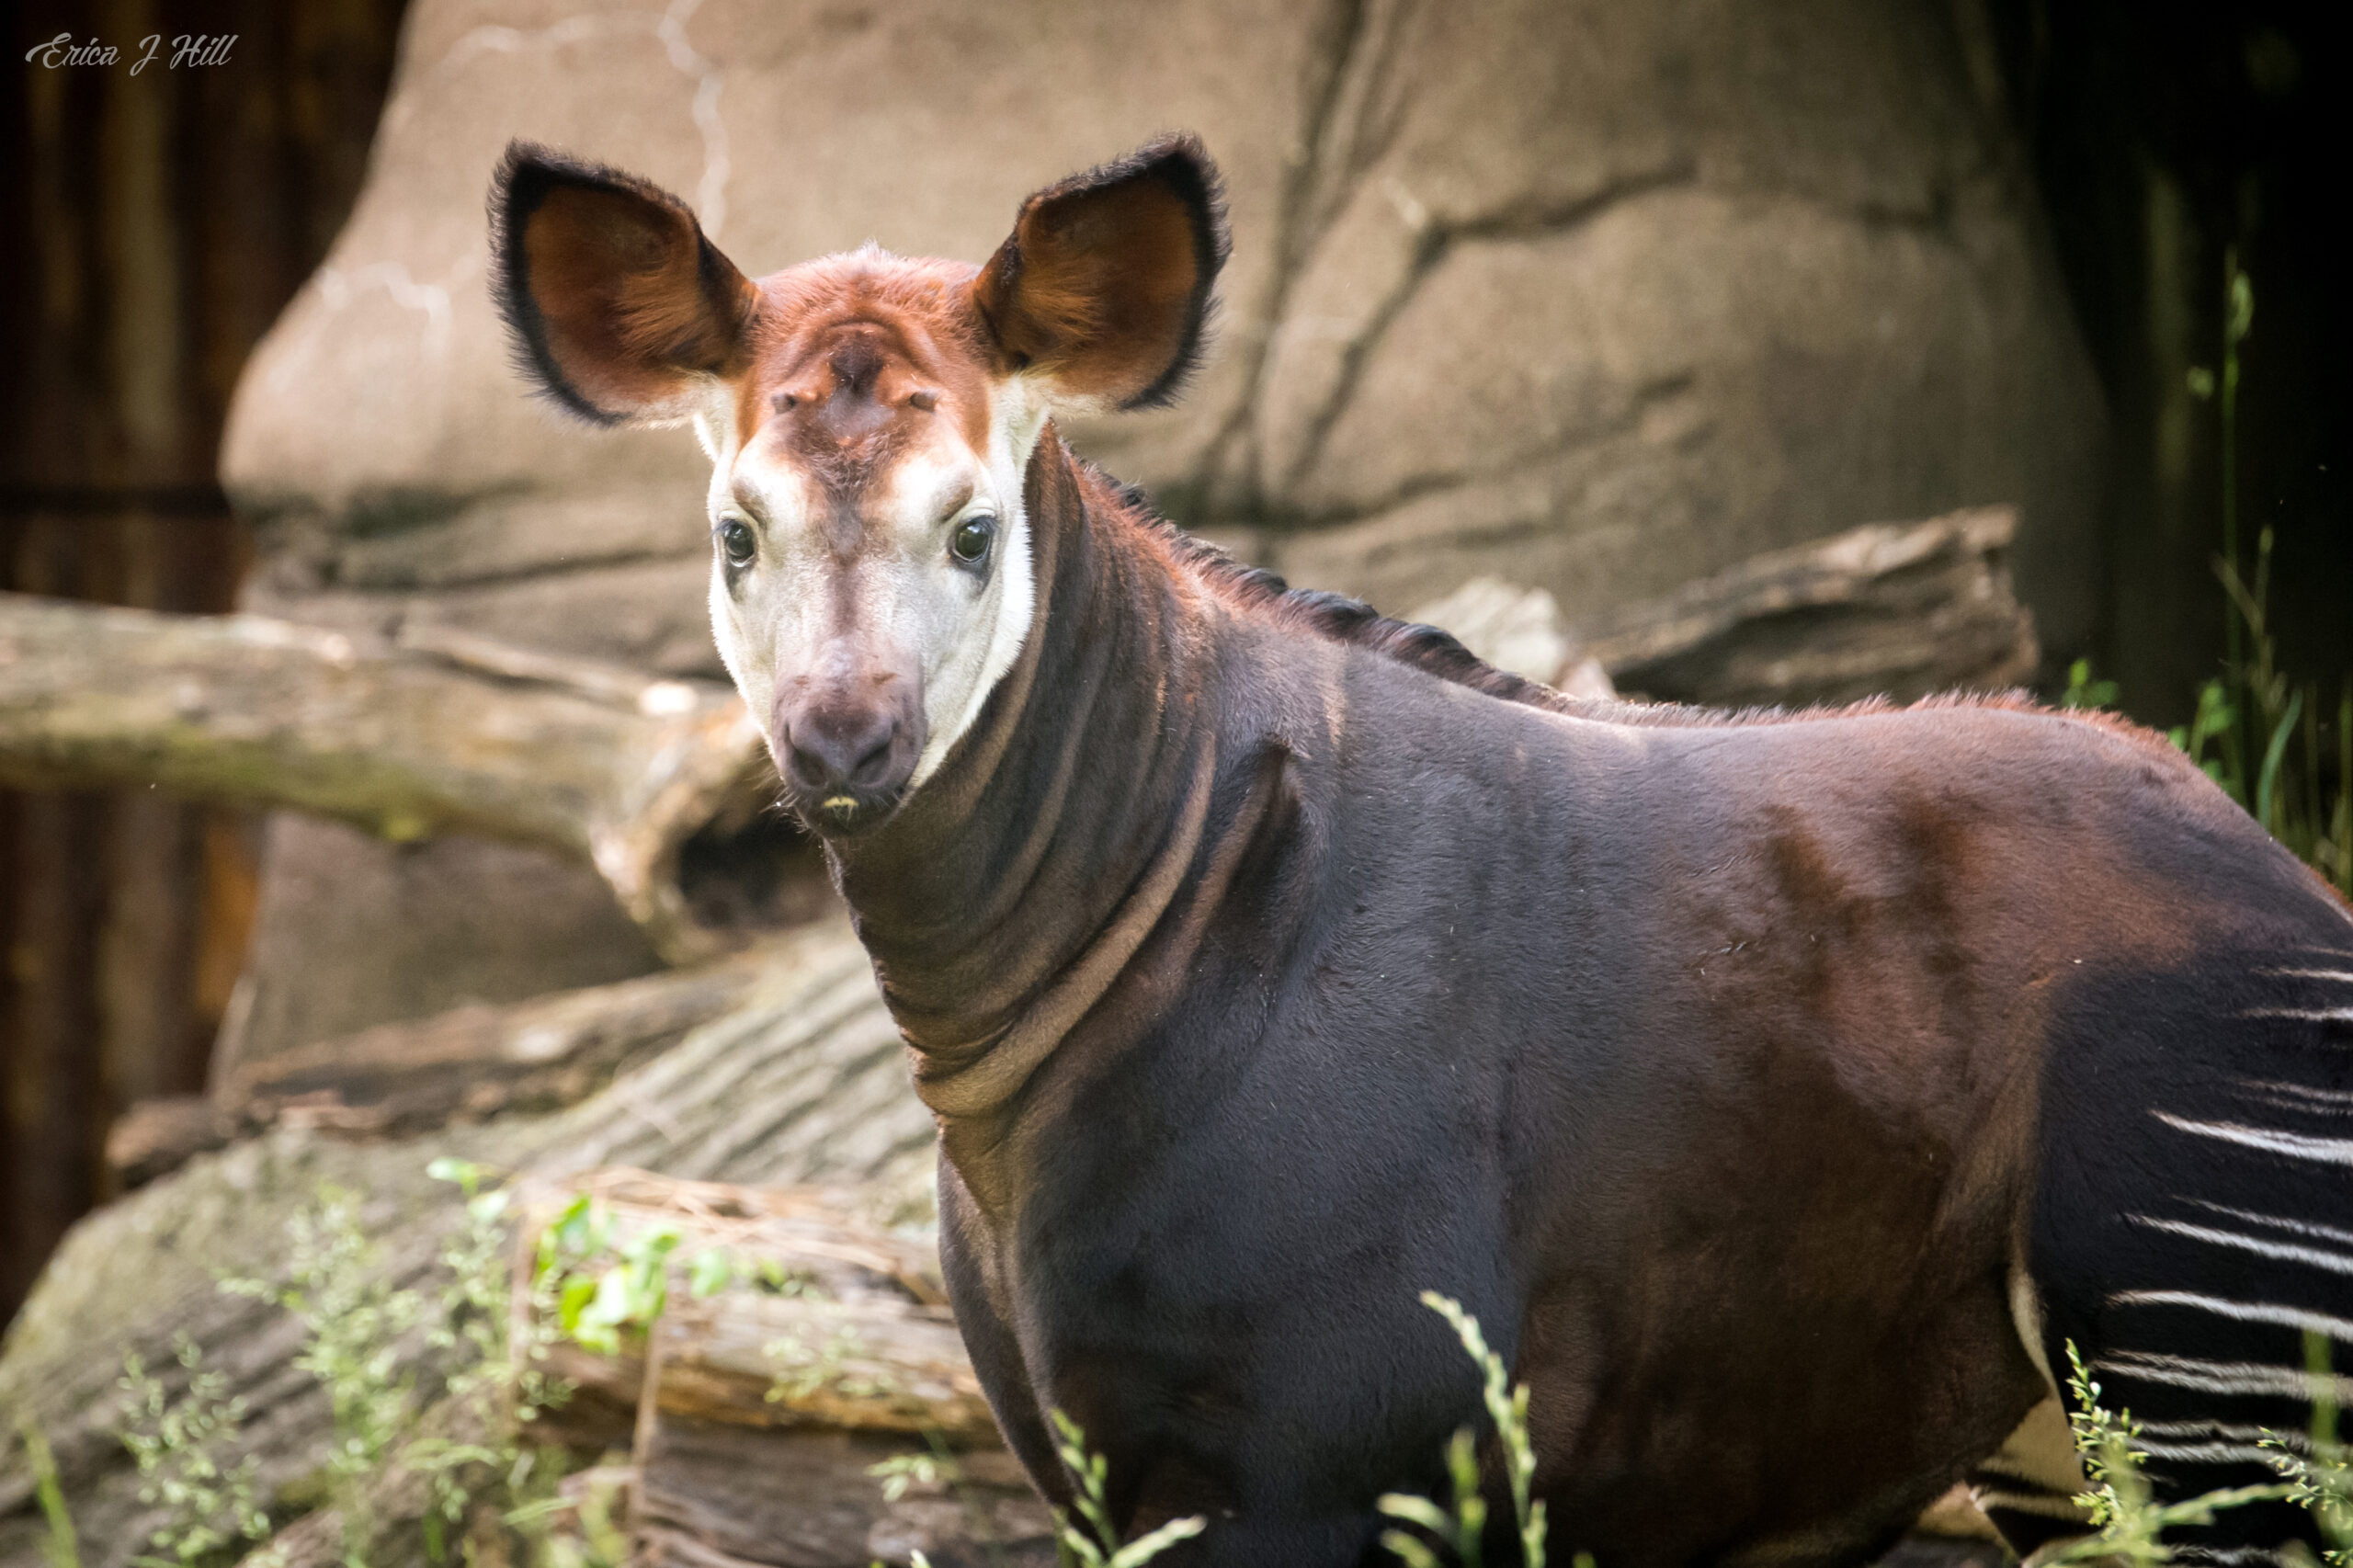 front view of an okapi